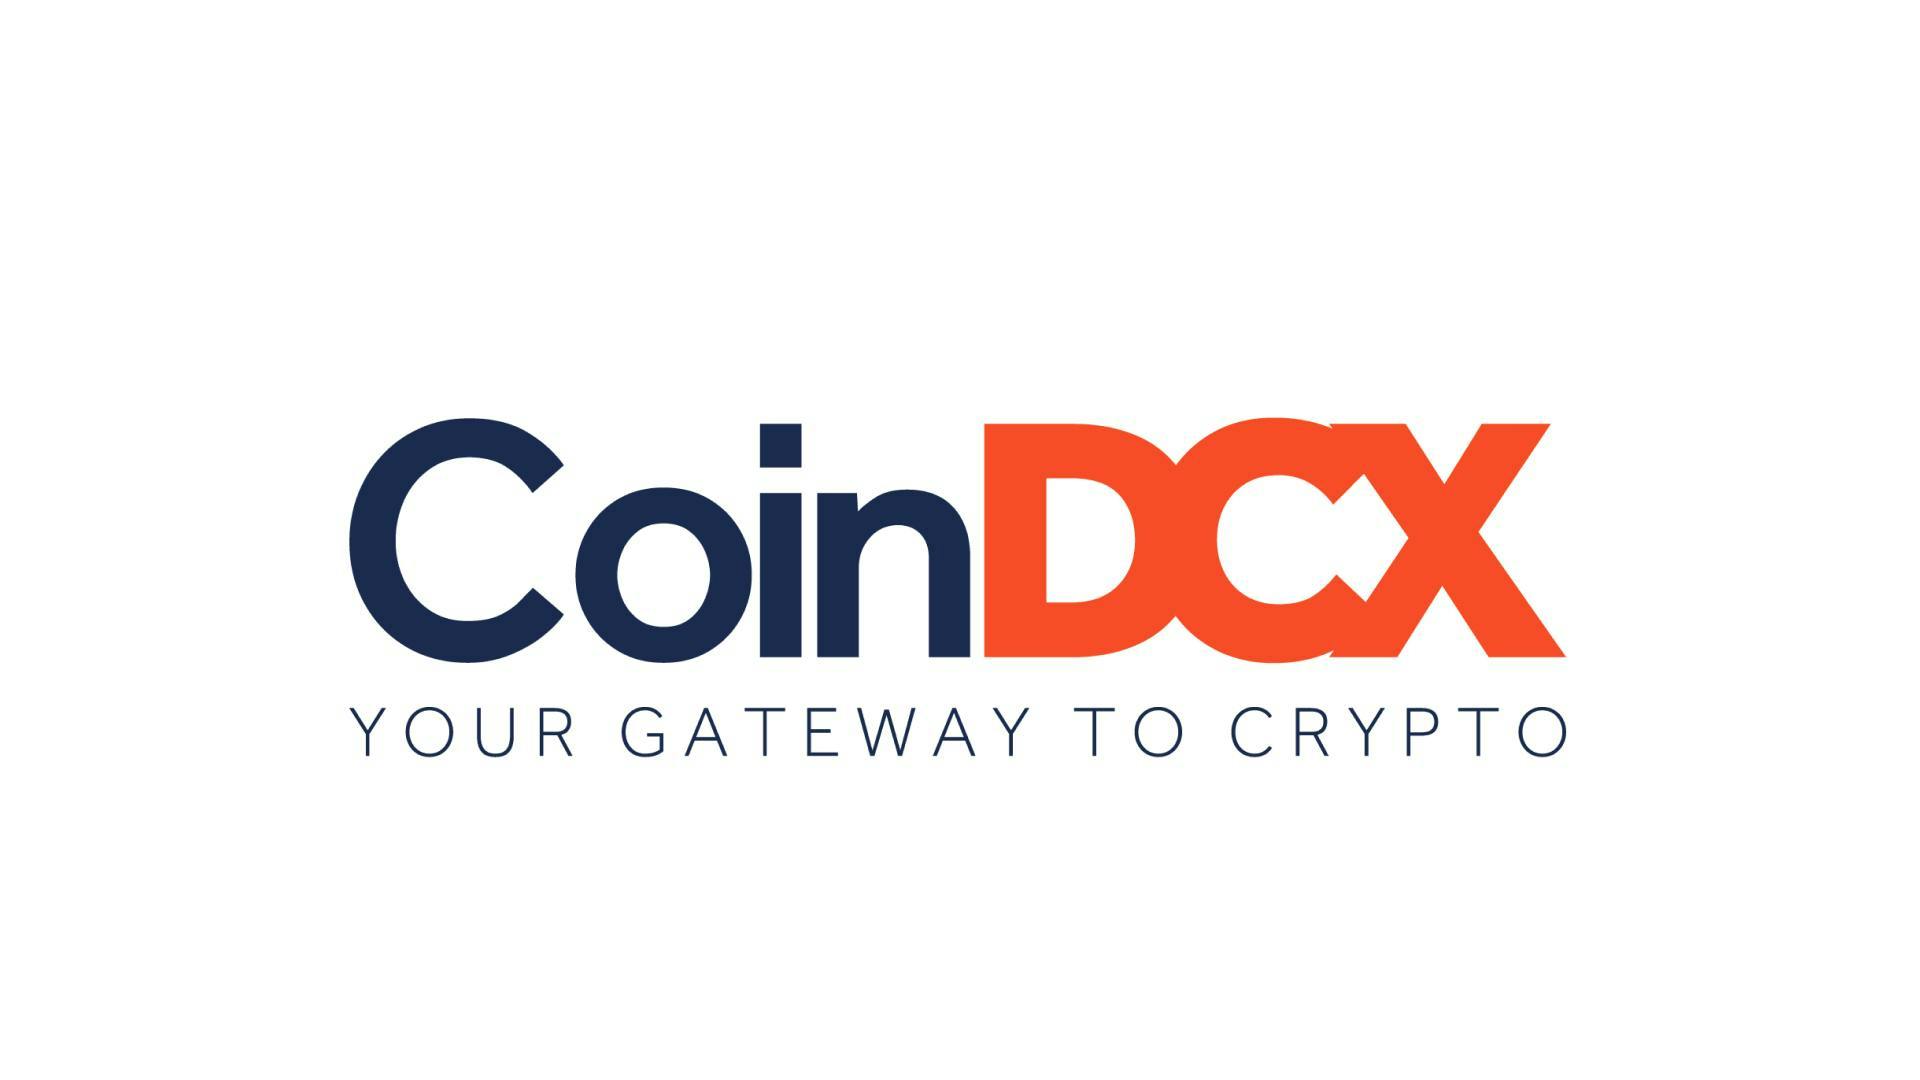 CoinDCX is hiring for Specialist-Social Media Role